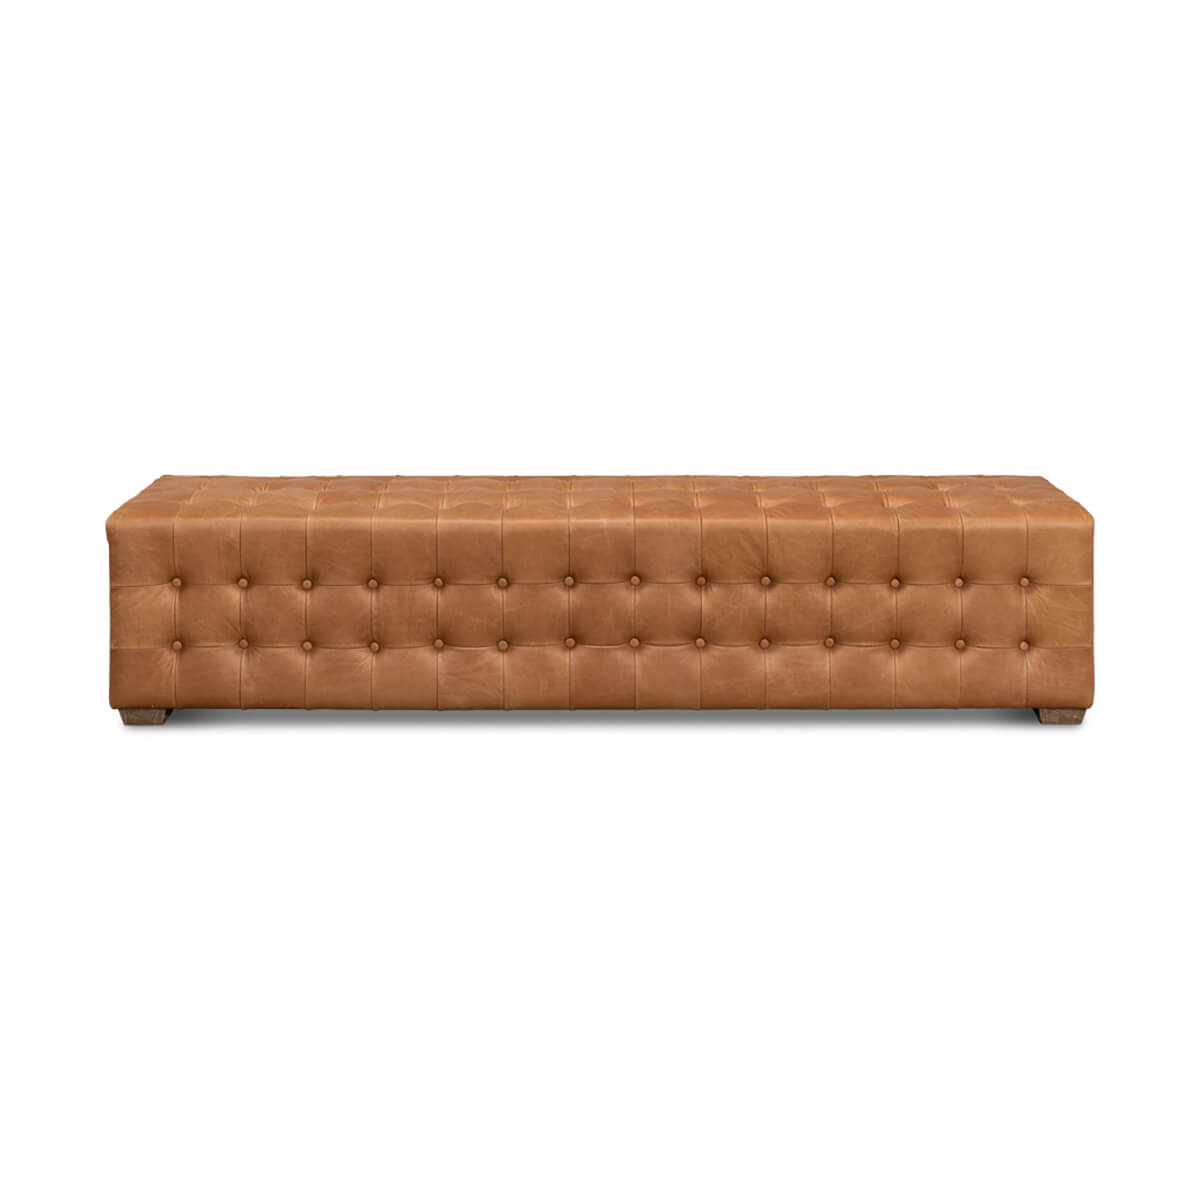 Modern Tufted Leather Upholstered Bench - English Georgian America